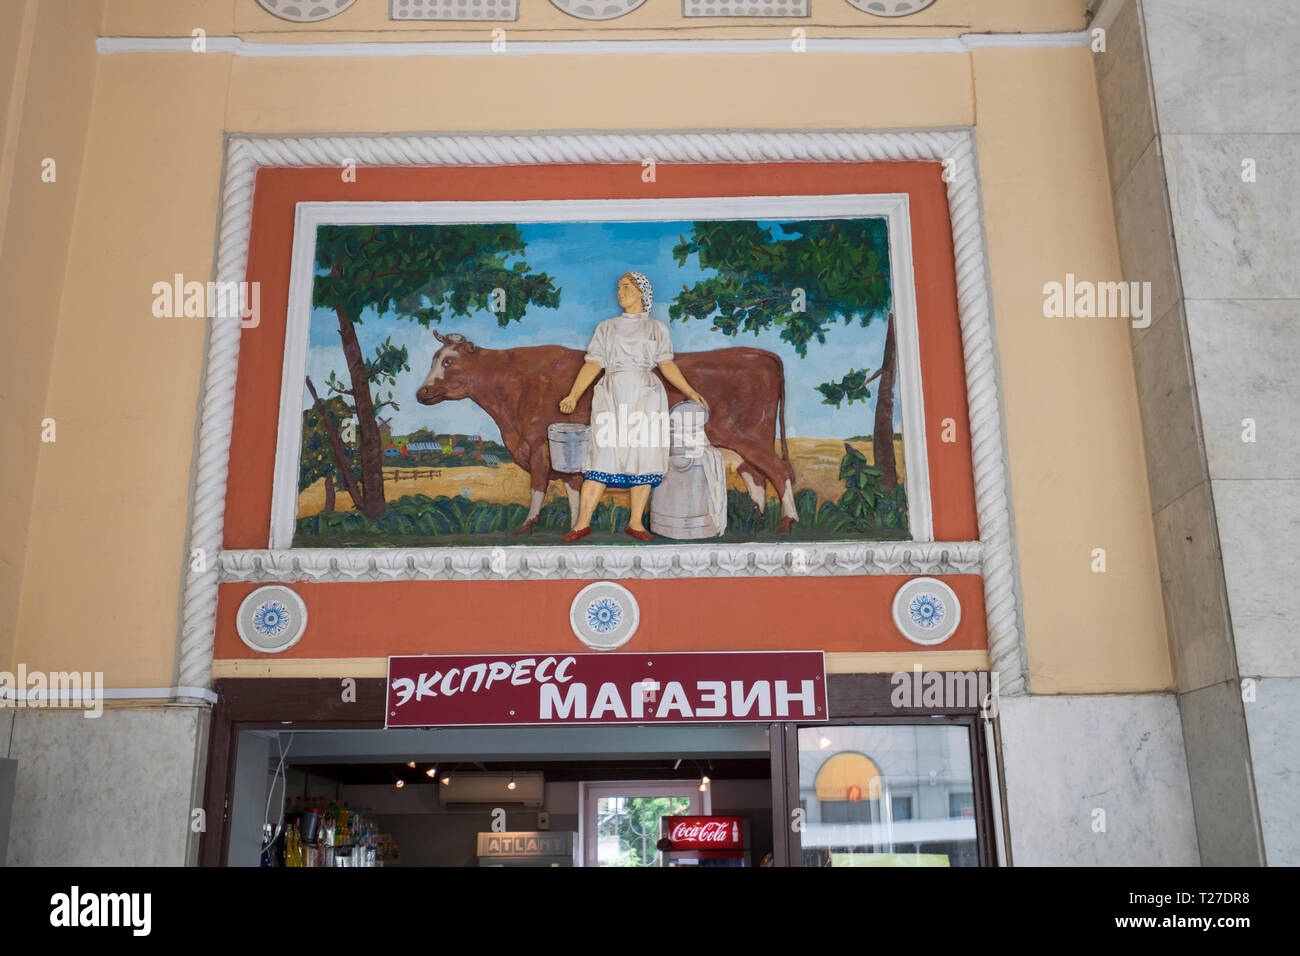 Centraĺny supermarket cafe, with its historic raised murals of everyday life in Minsk, Belarus. Stock Photo